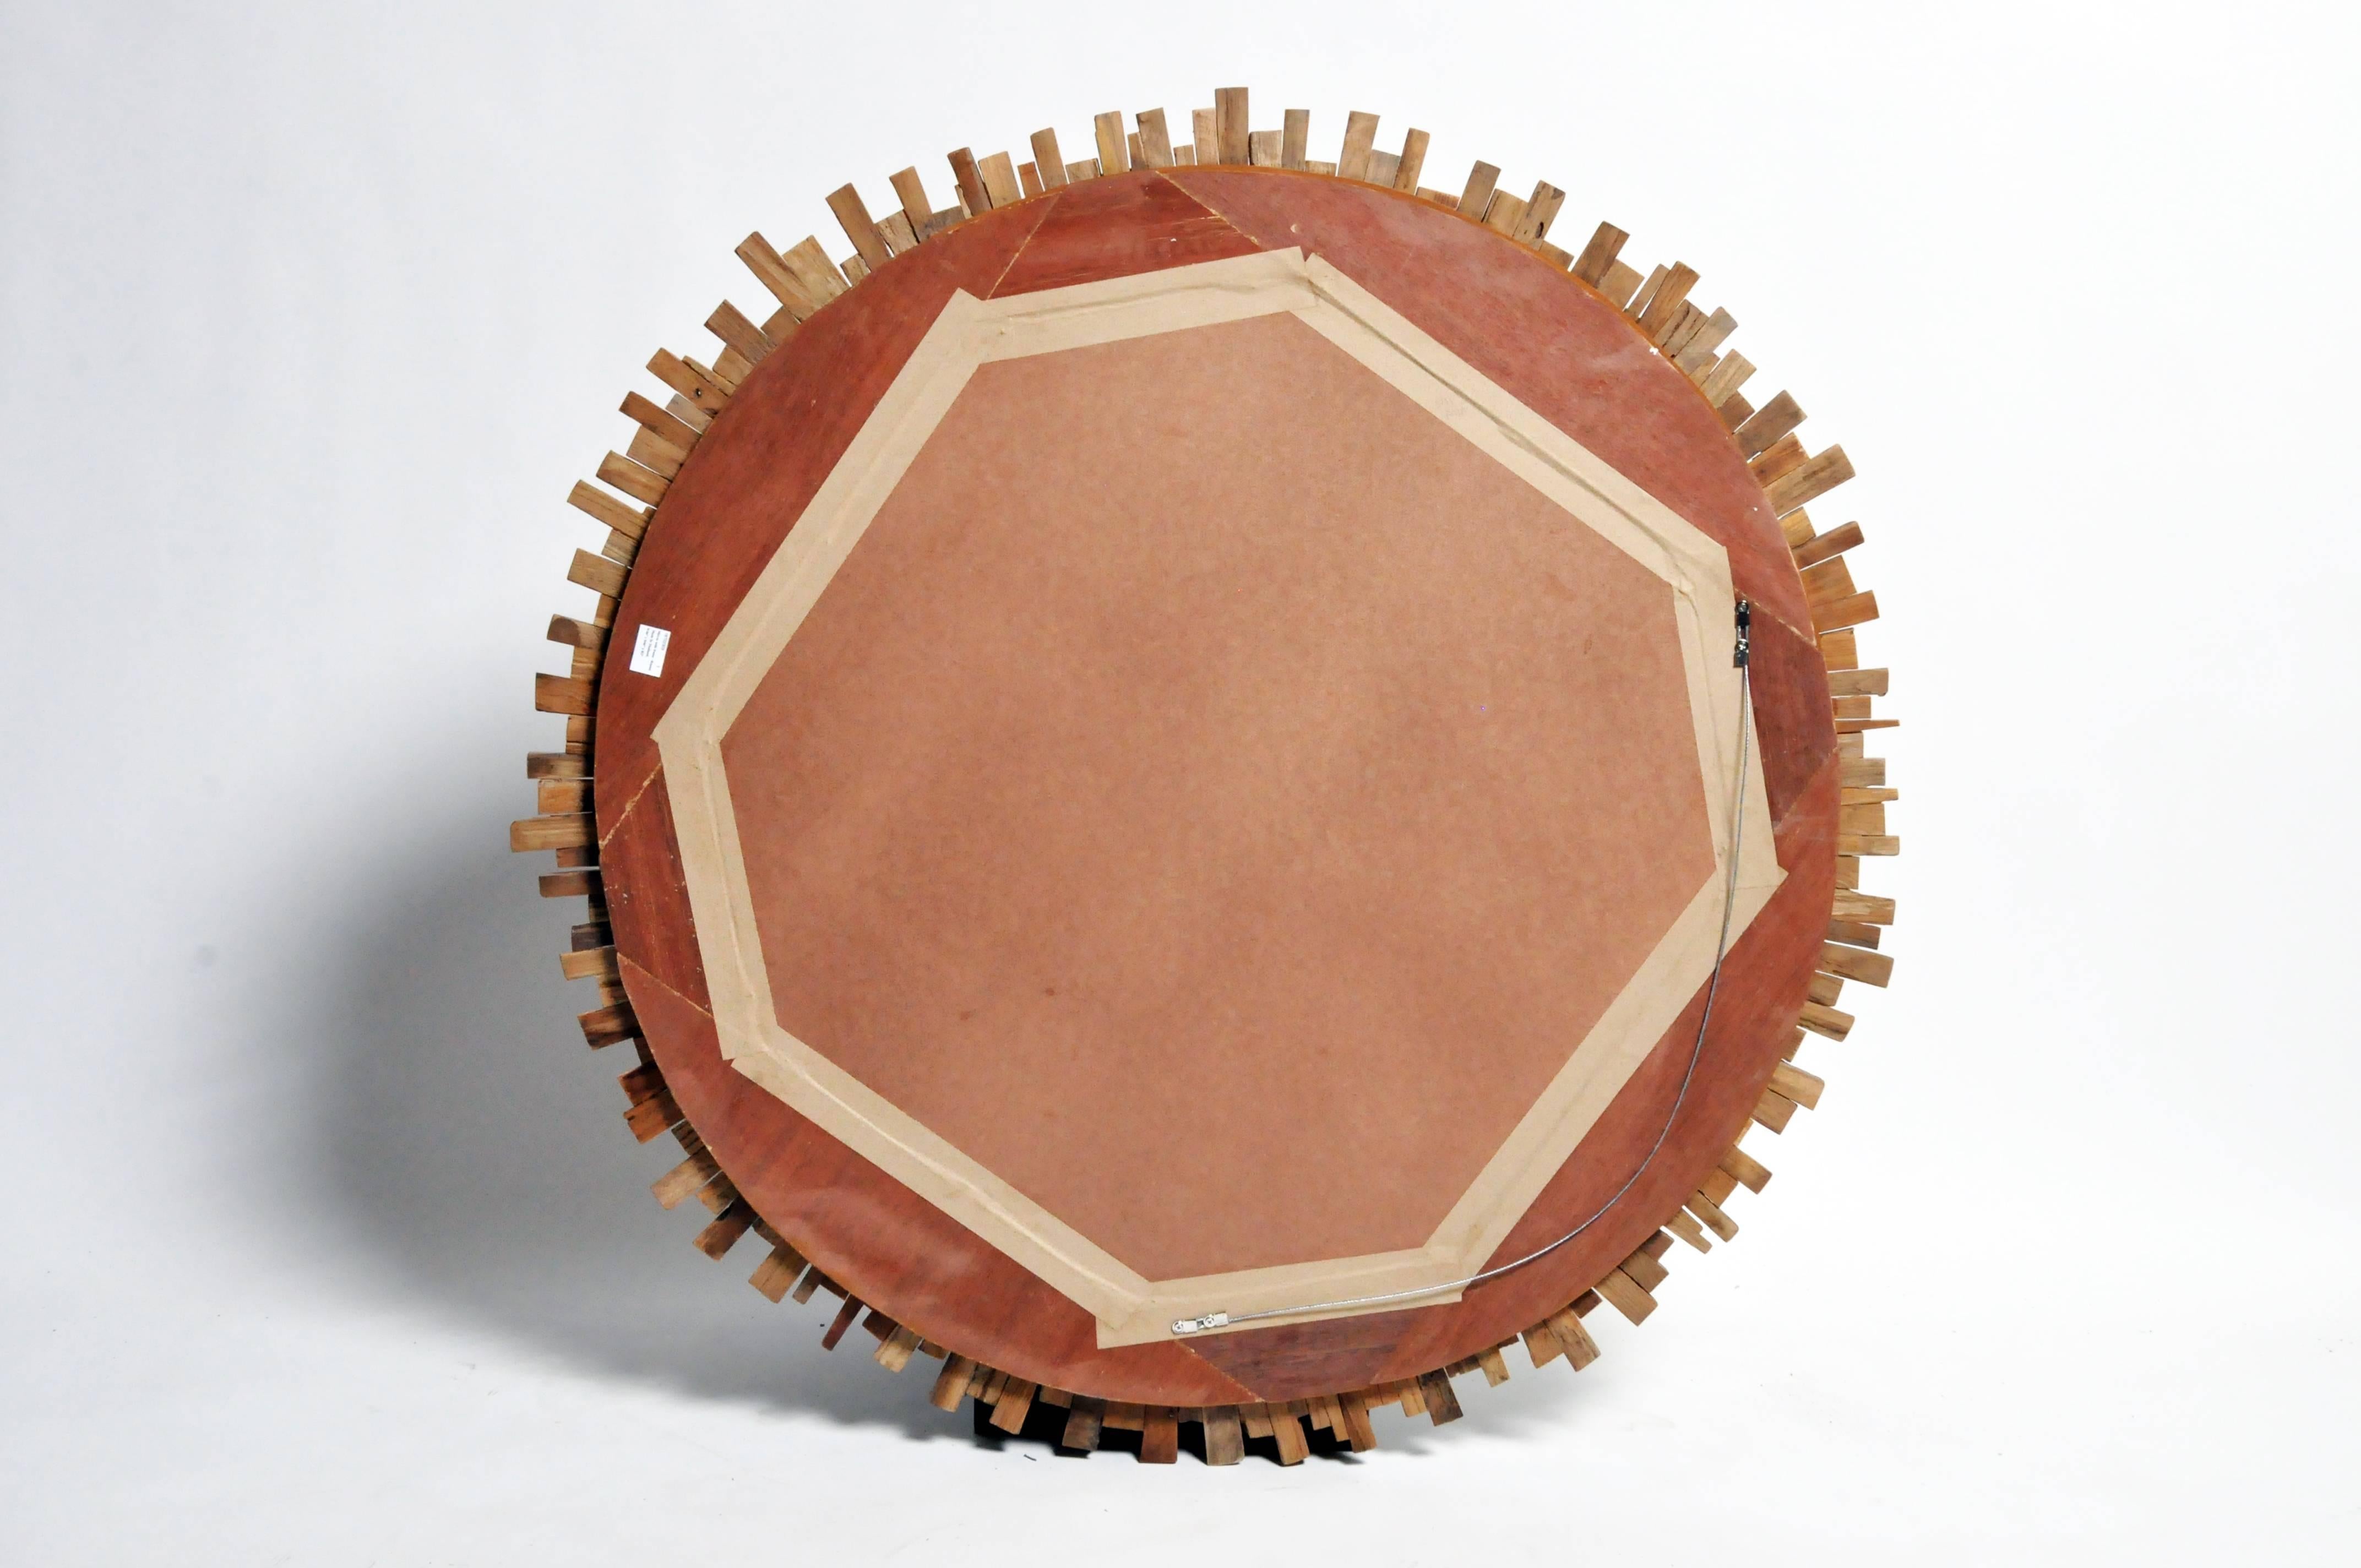 Natural strips of reclaimed teak radiate from a circular mirror plate. The raw, untreated wood almost has a driftwood-like quality to it; quite different than the Baroque gilt Italian mirrors that it is inspired by.